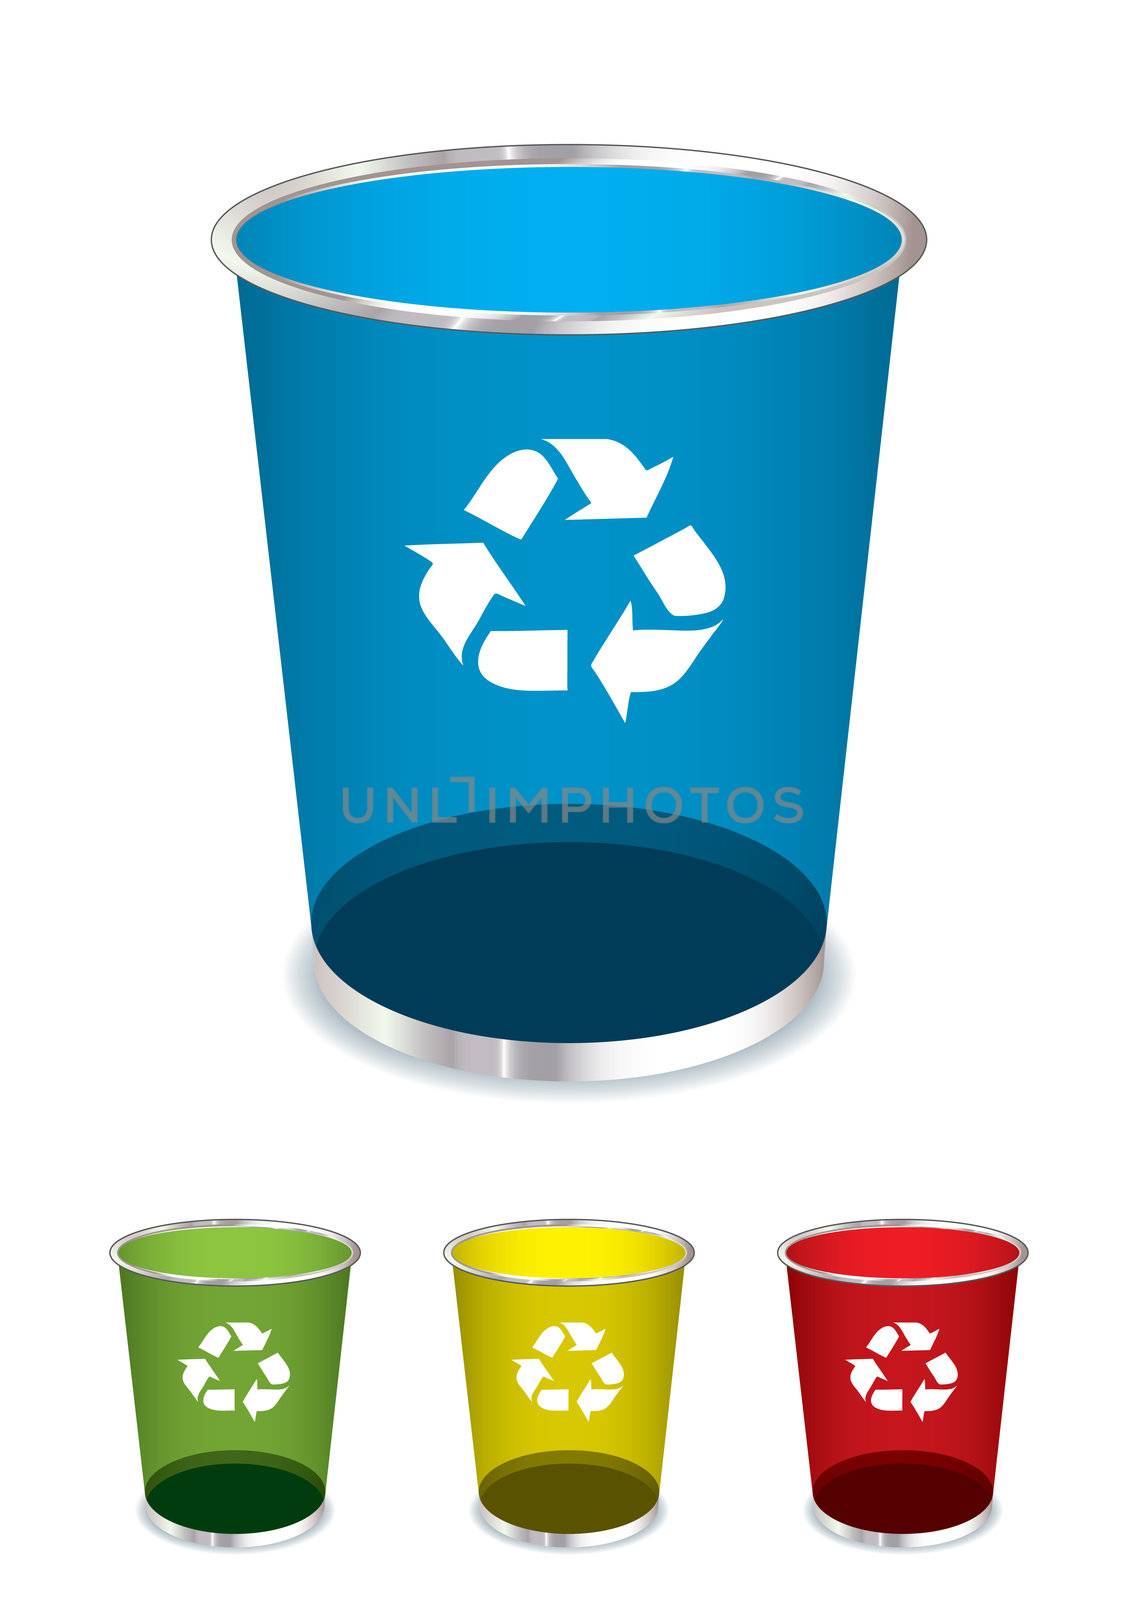 Bright glass recycle trash can icons or symbols